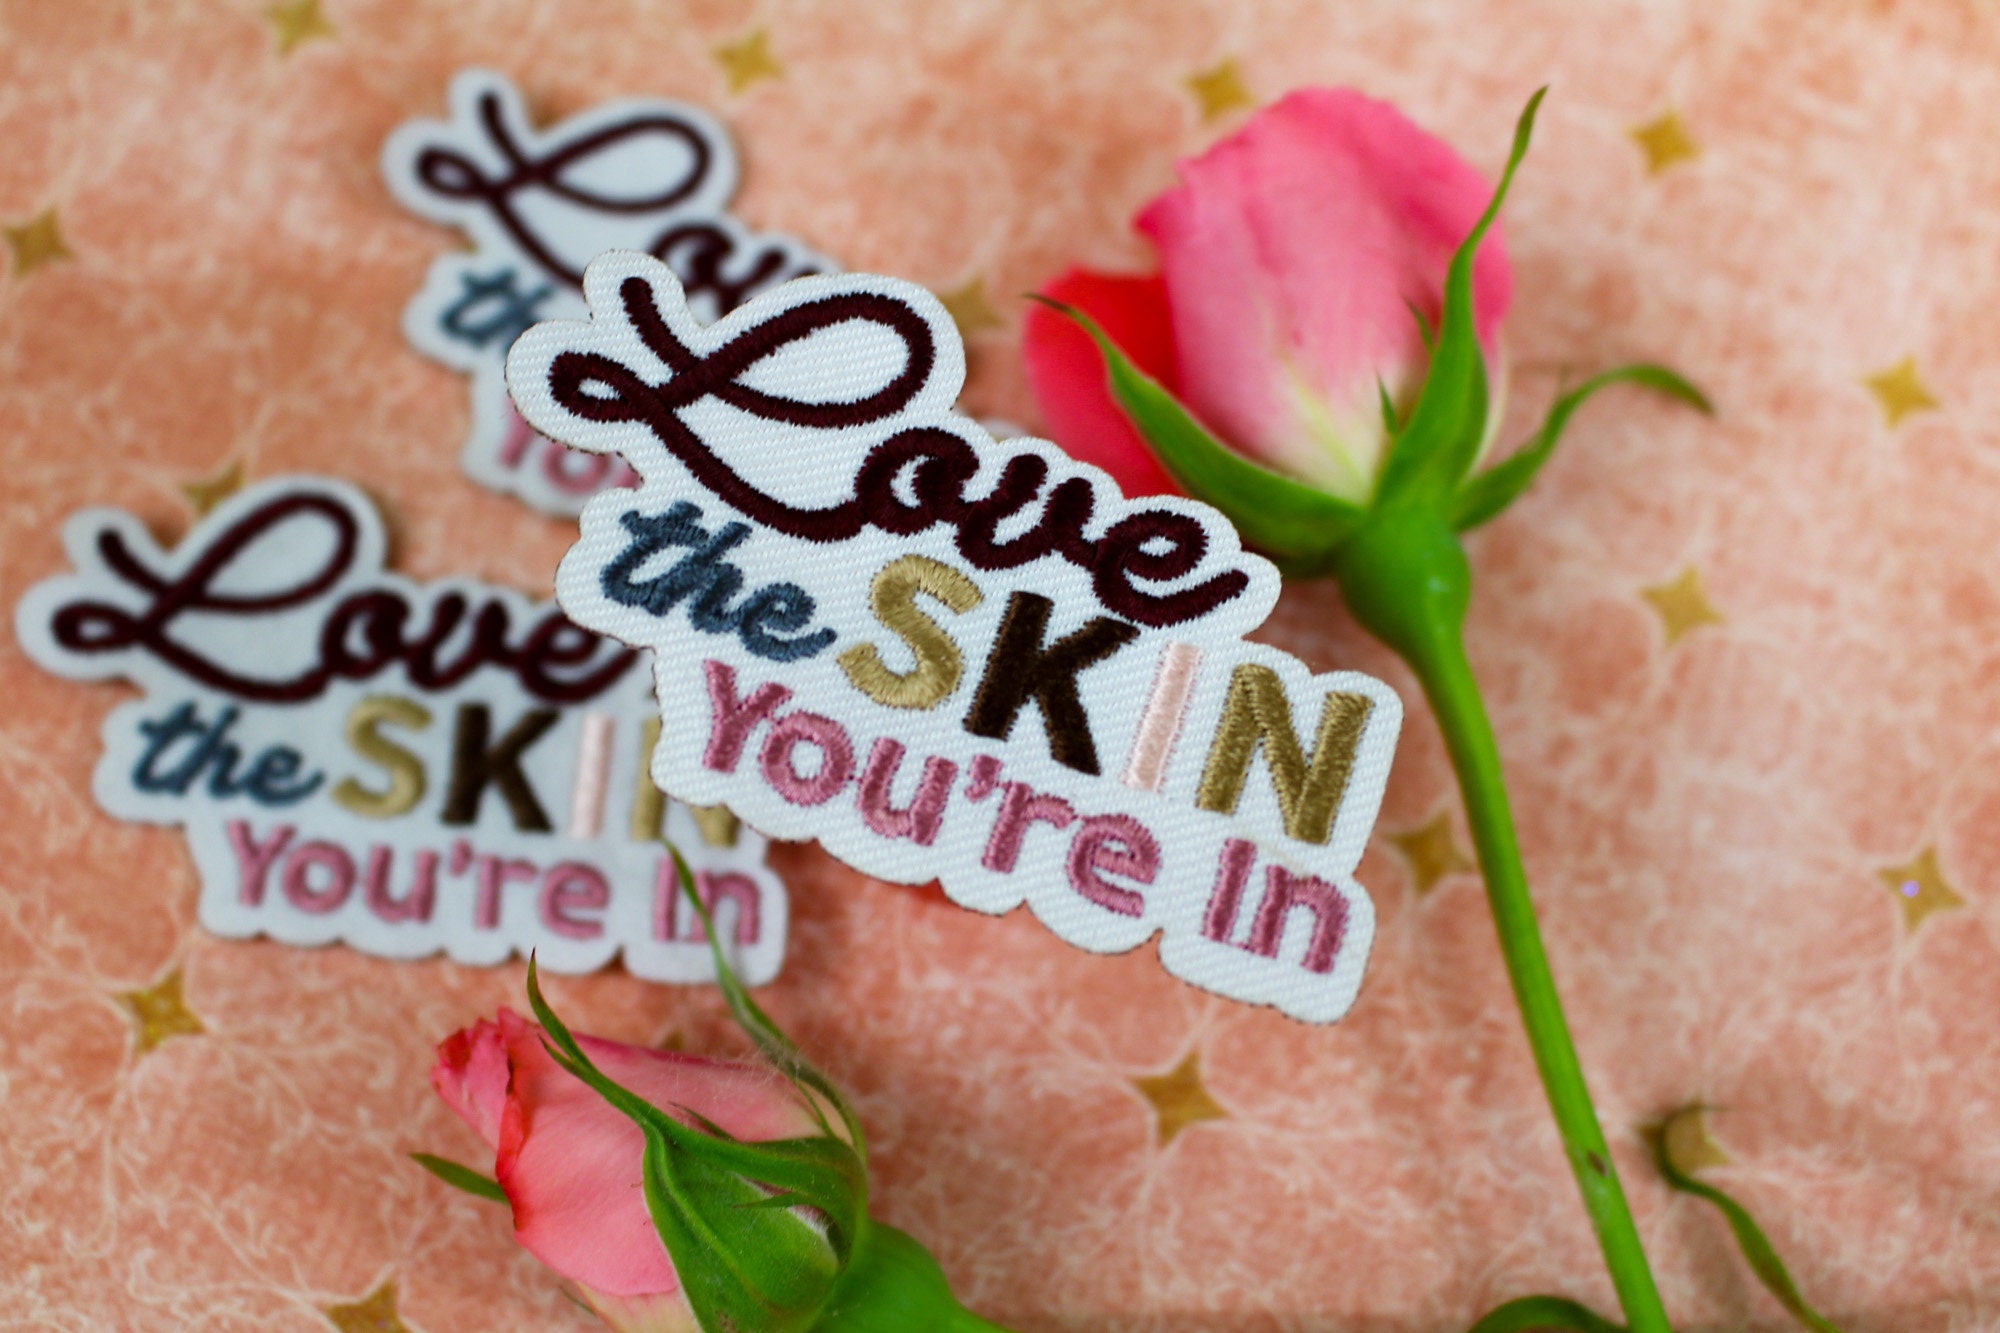 Iron-on Patch Love the Skin You're In, Embroidered Patches for Hats, –  PatchPartyClub